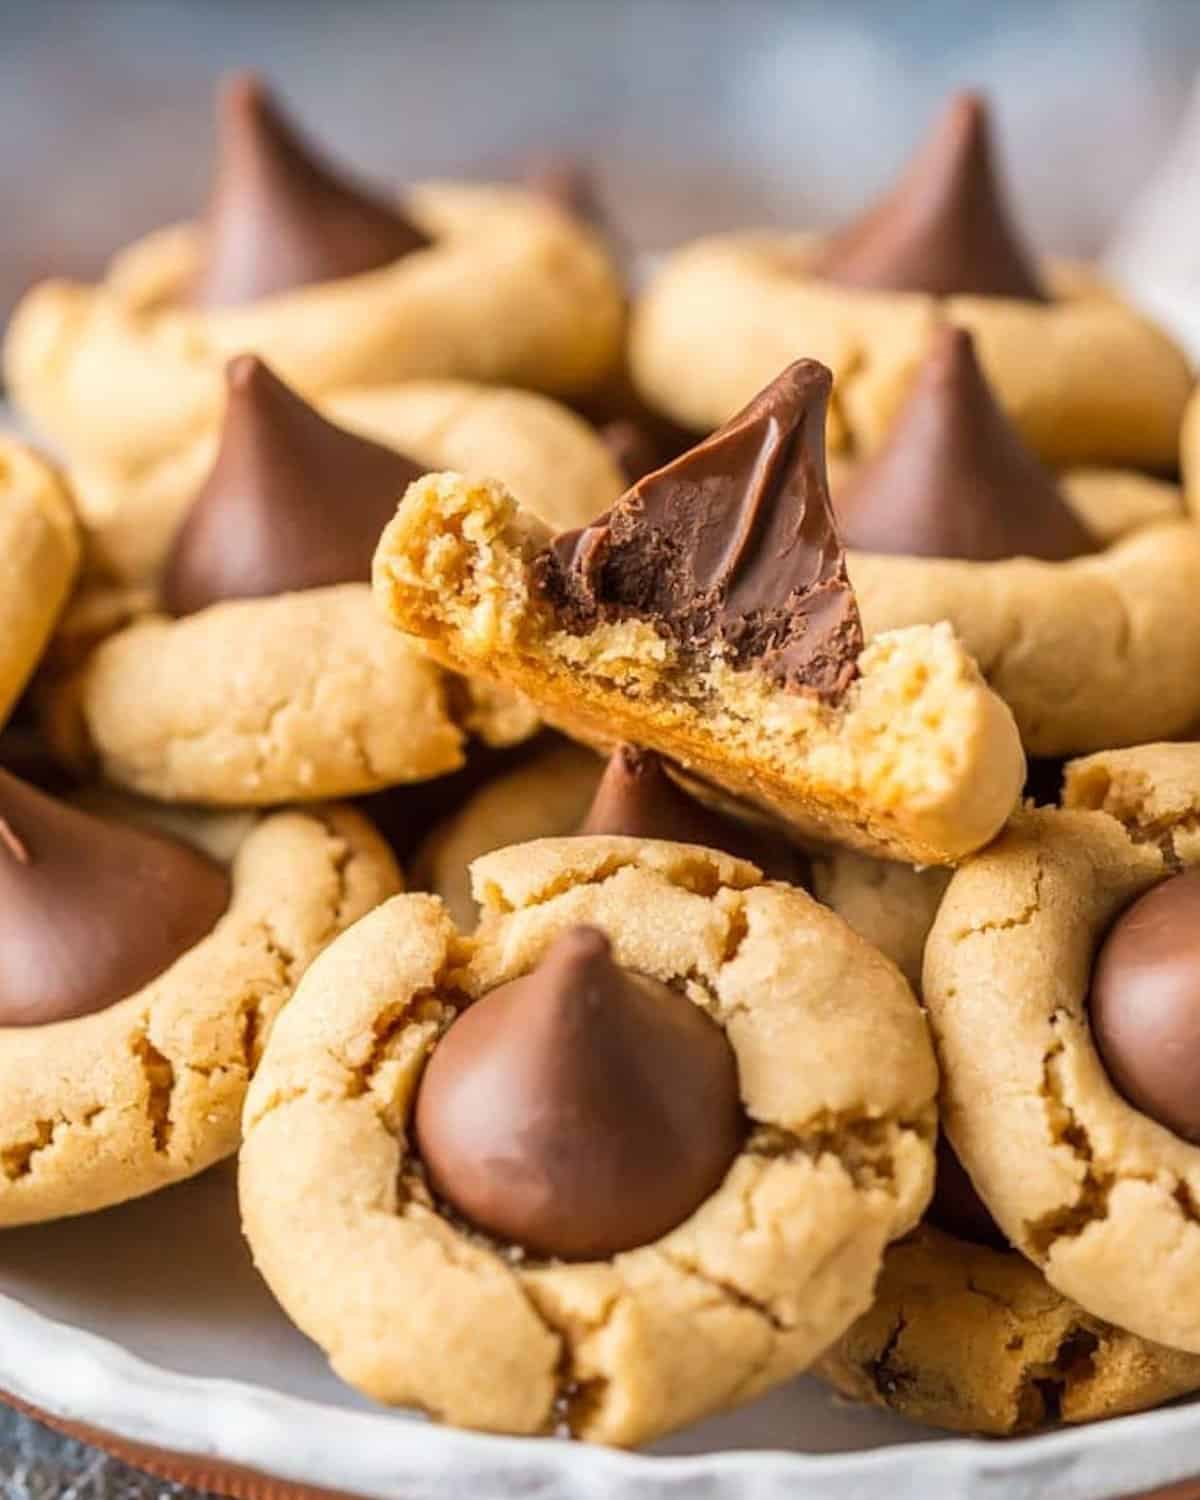 Hershey Kiss cookies with a bite taken out of them.